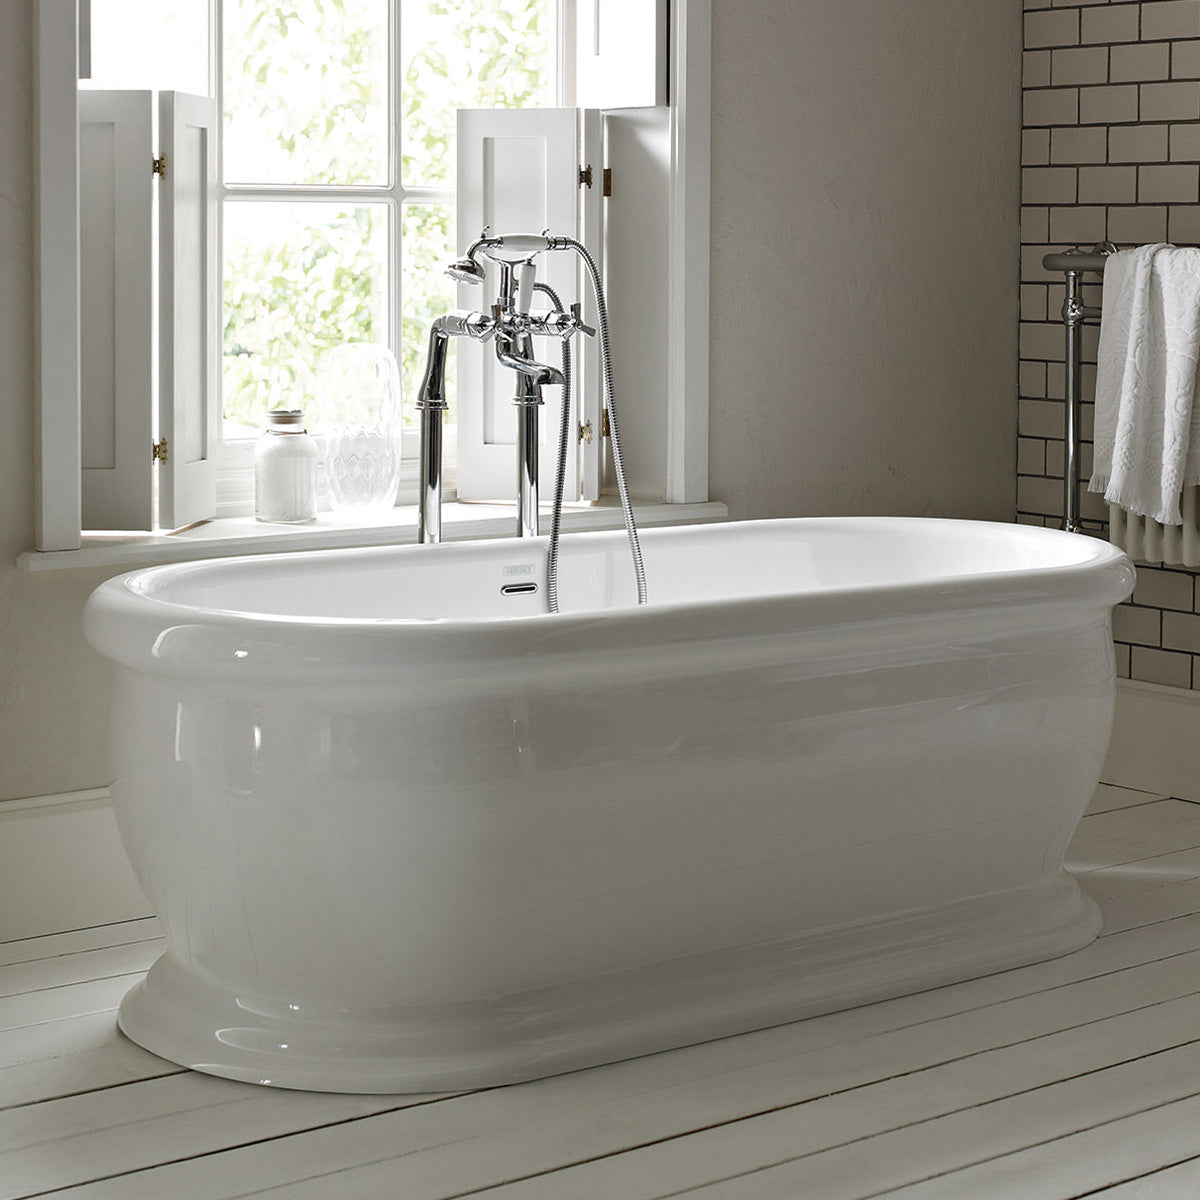 Heritage Derrymore 1745mm Roll Top Freestanding Double-Ended Bath Acry